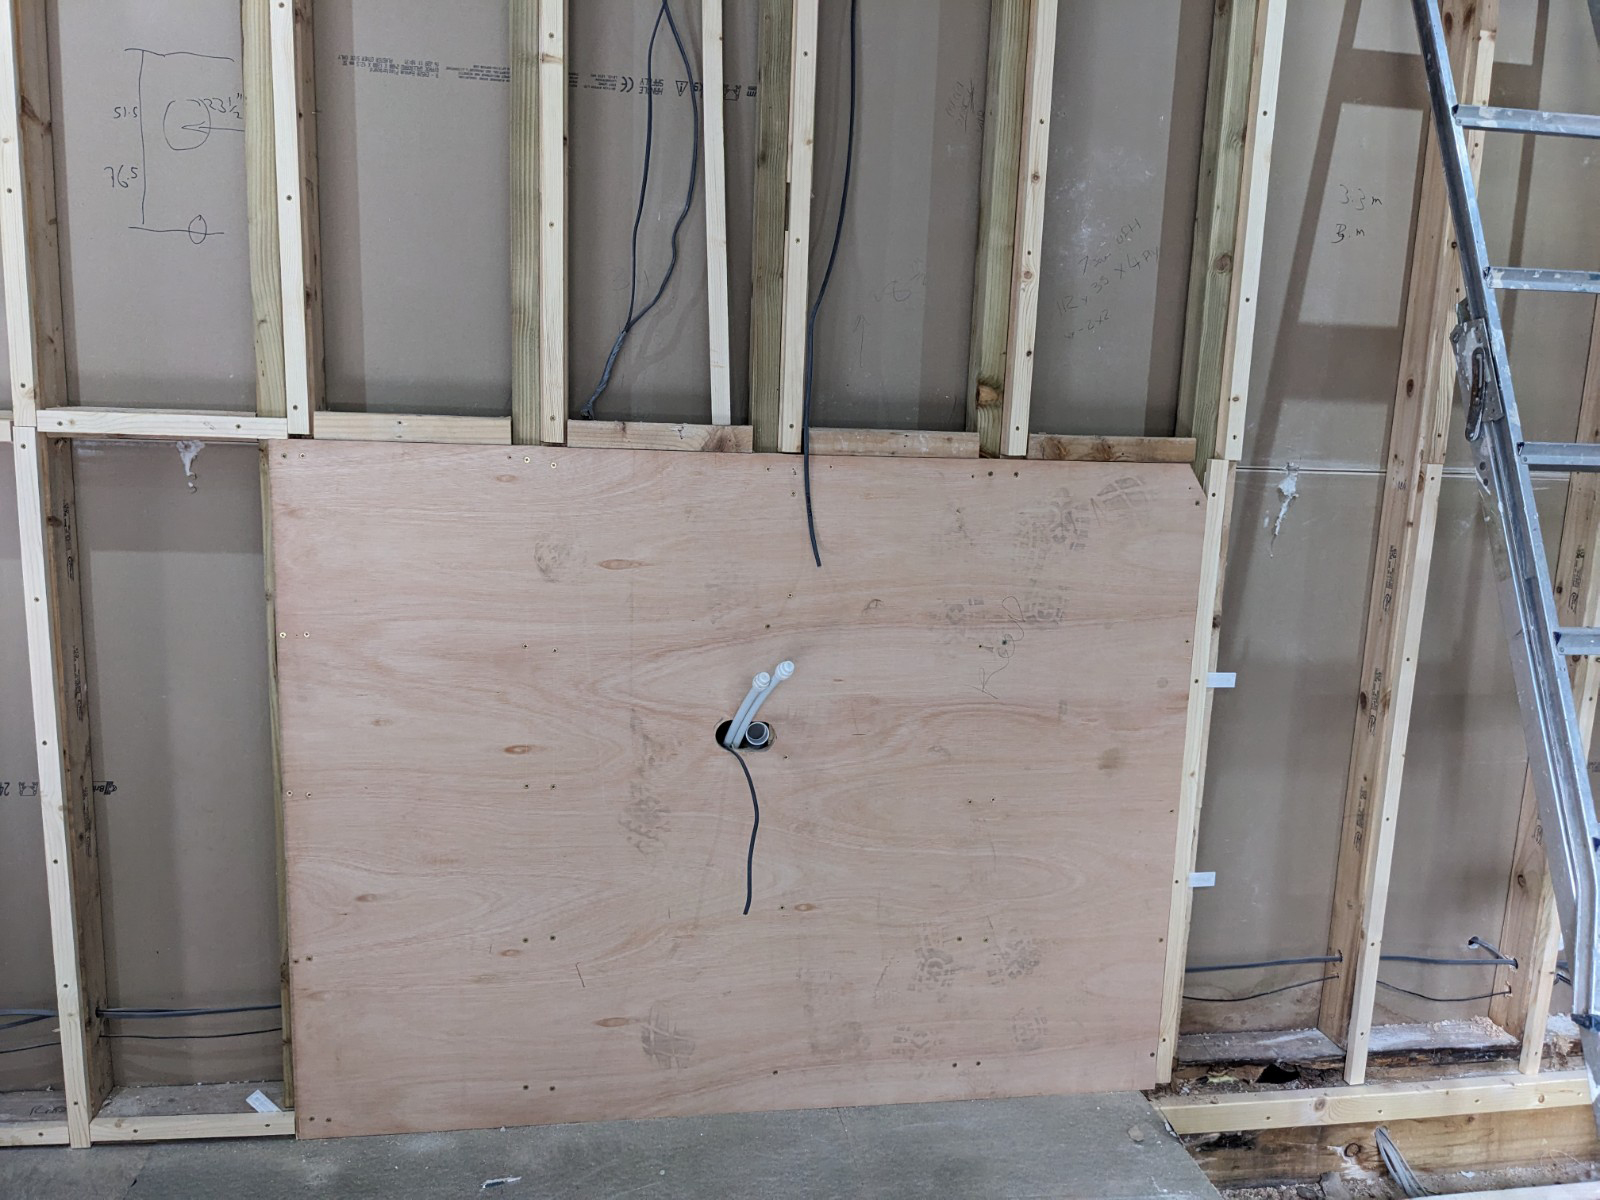 A photograph of a plywood board on a wall with pipework coming out